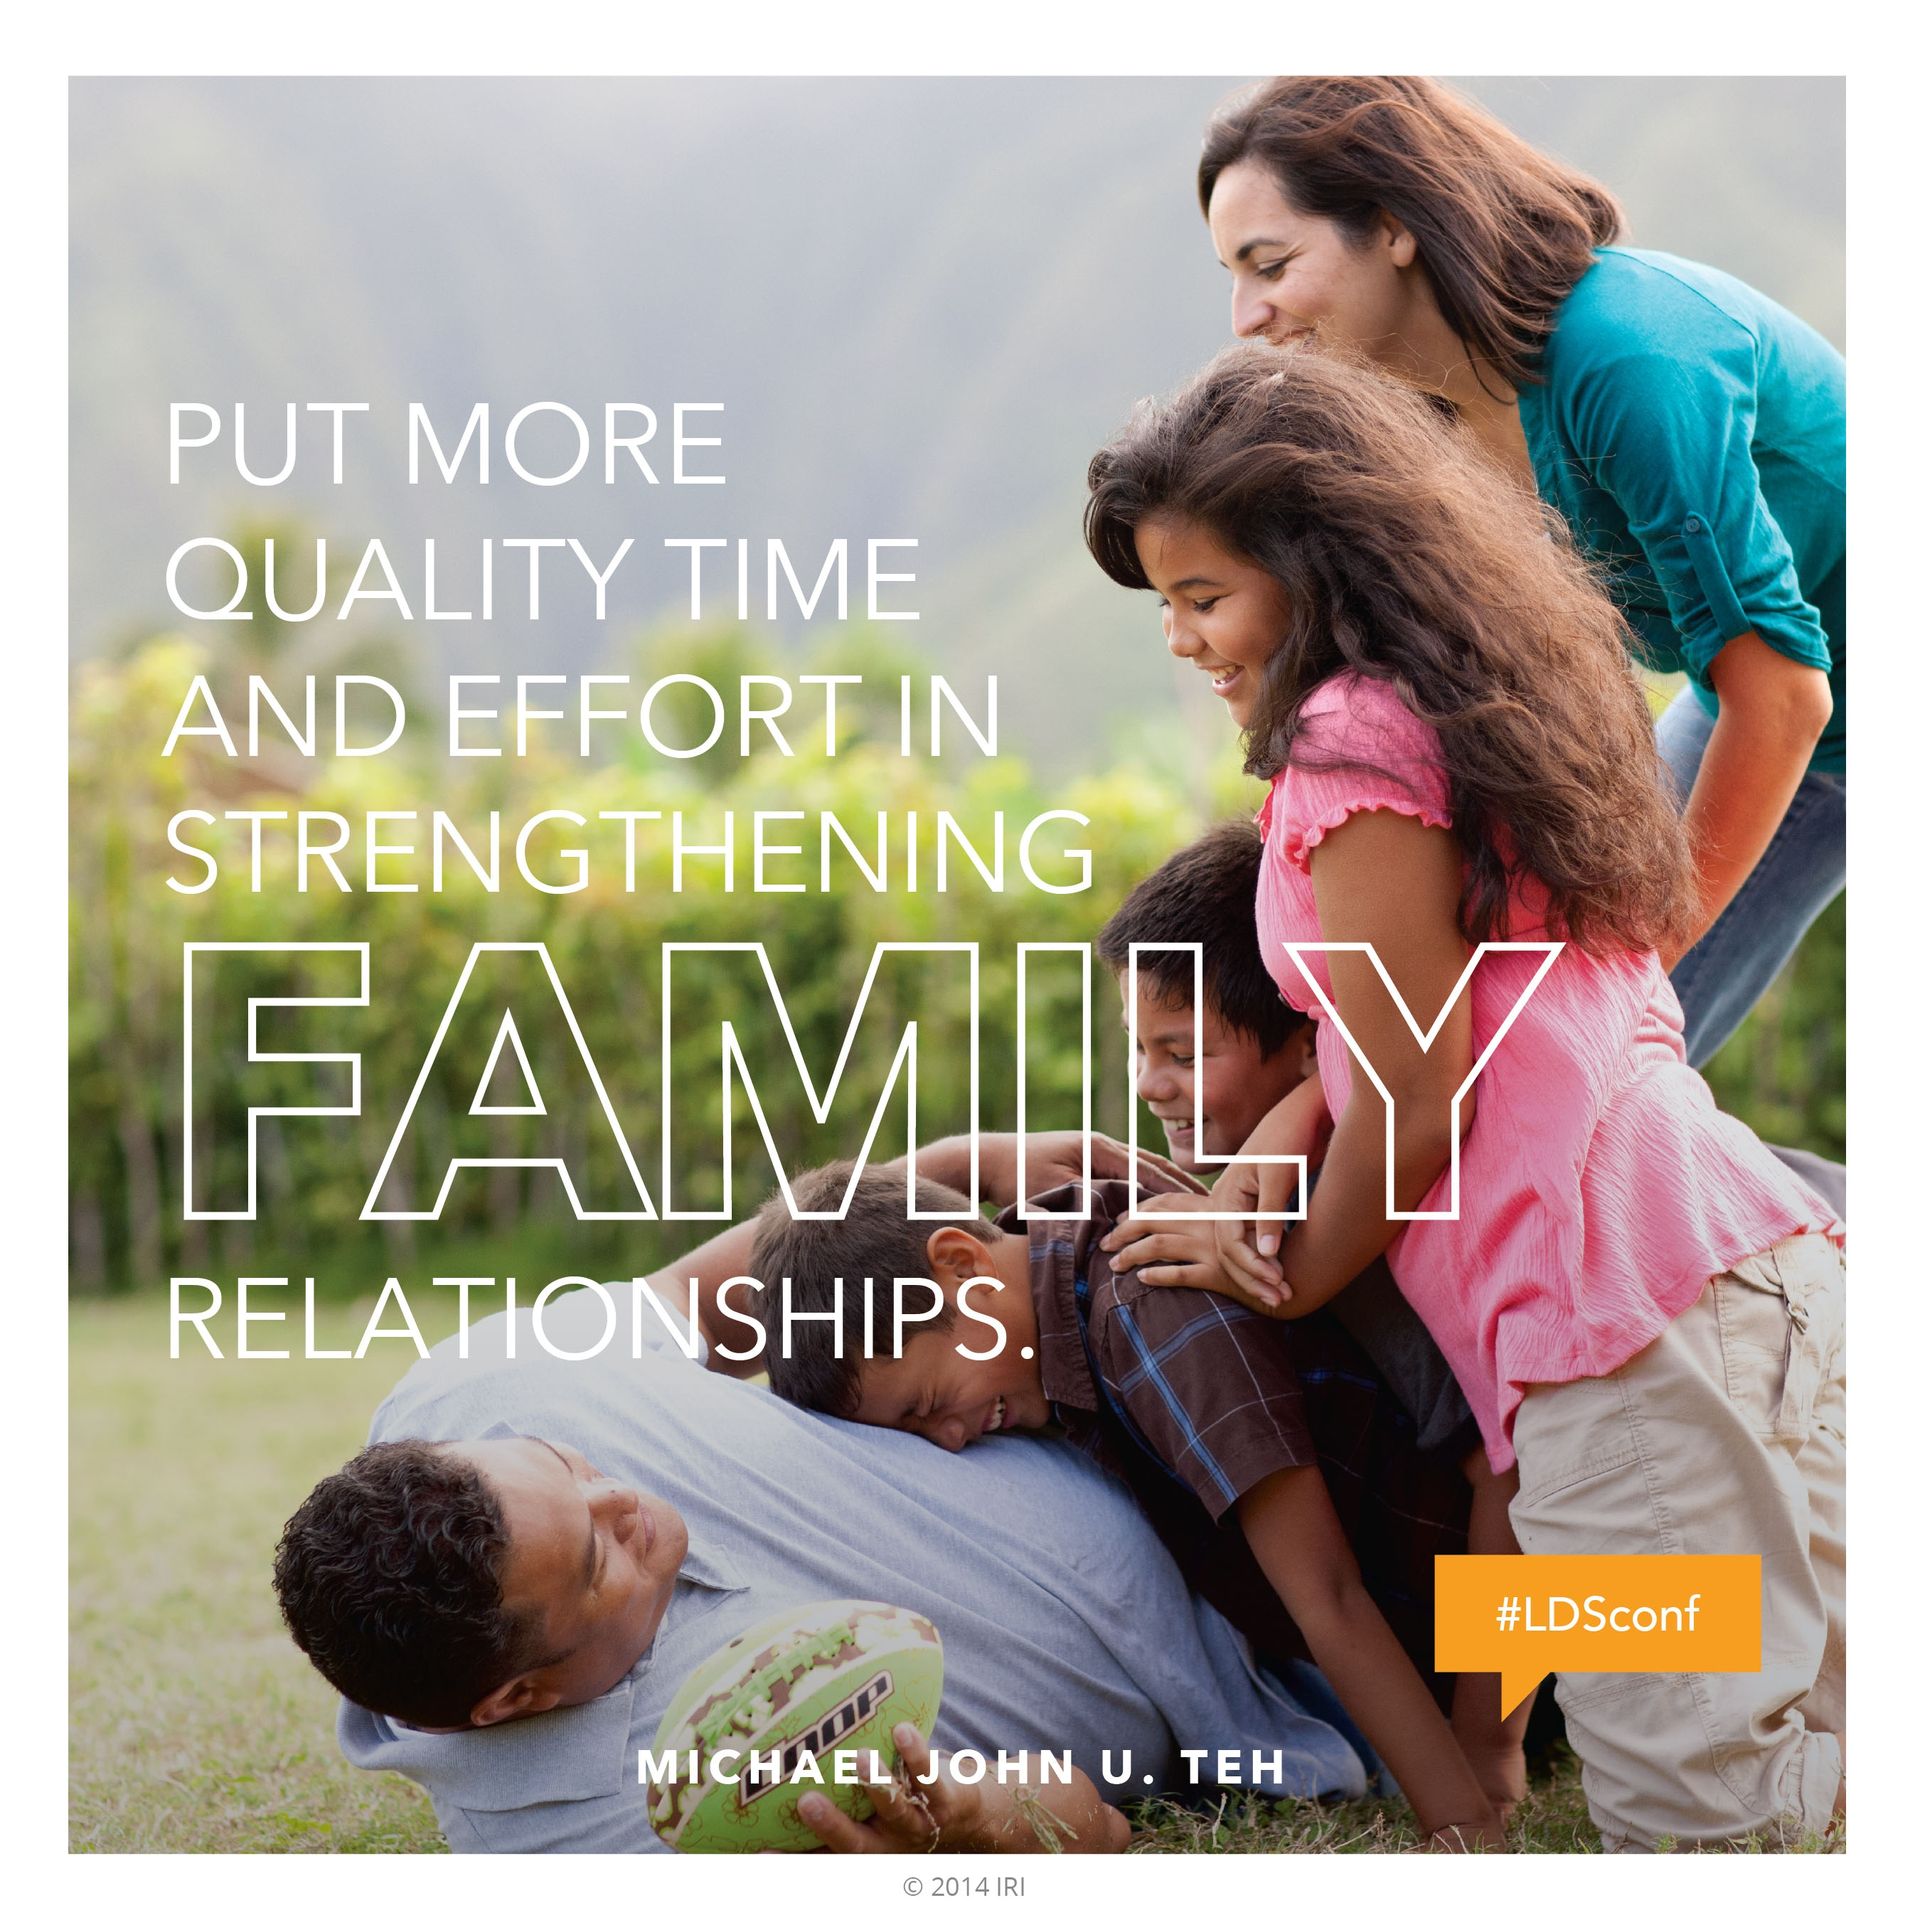 “Put more quality time and effort in strengthening family relationships.”—Elder Michael John U. Teh, “Where Your Treasure Is” © undefined ipCode 1.